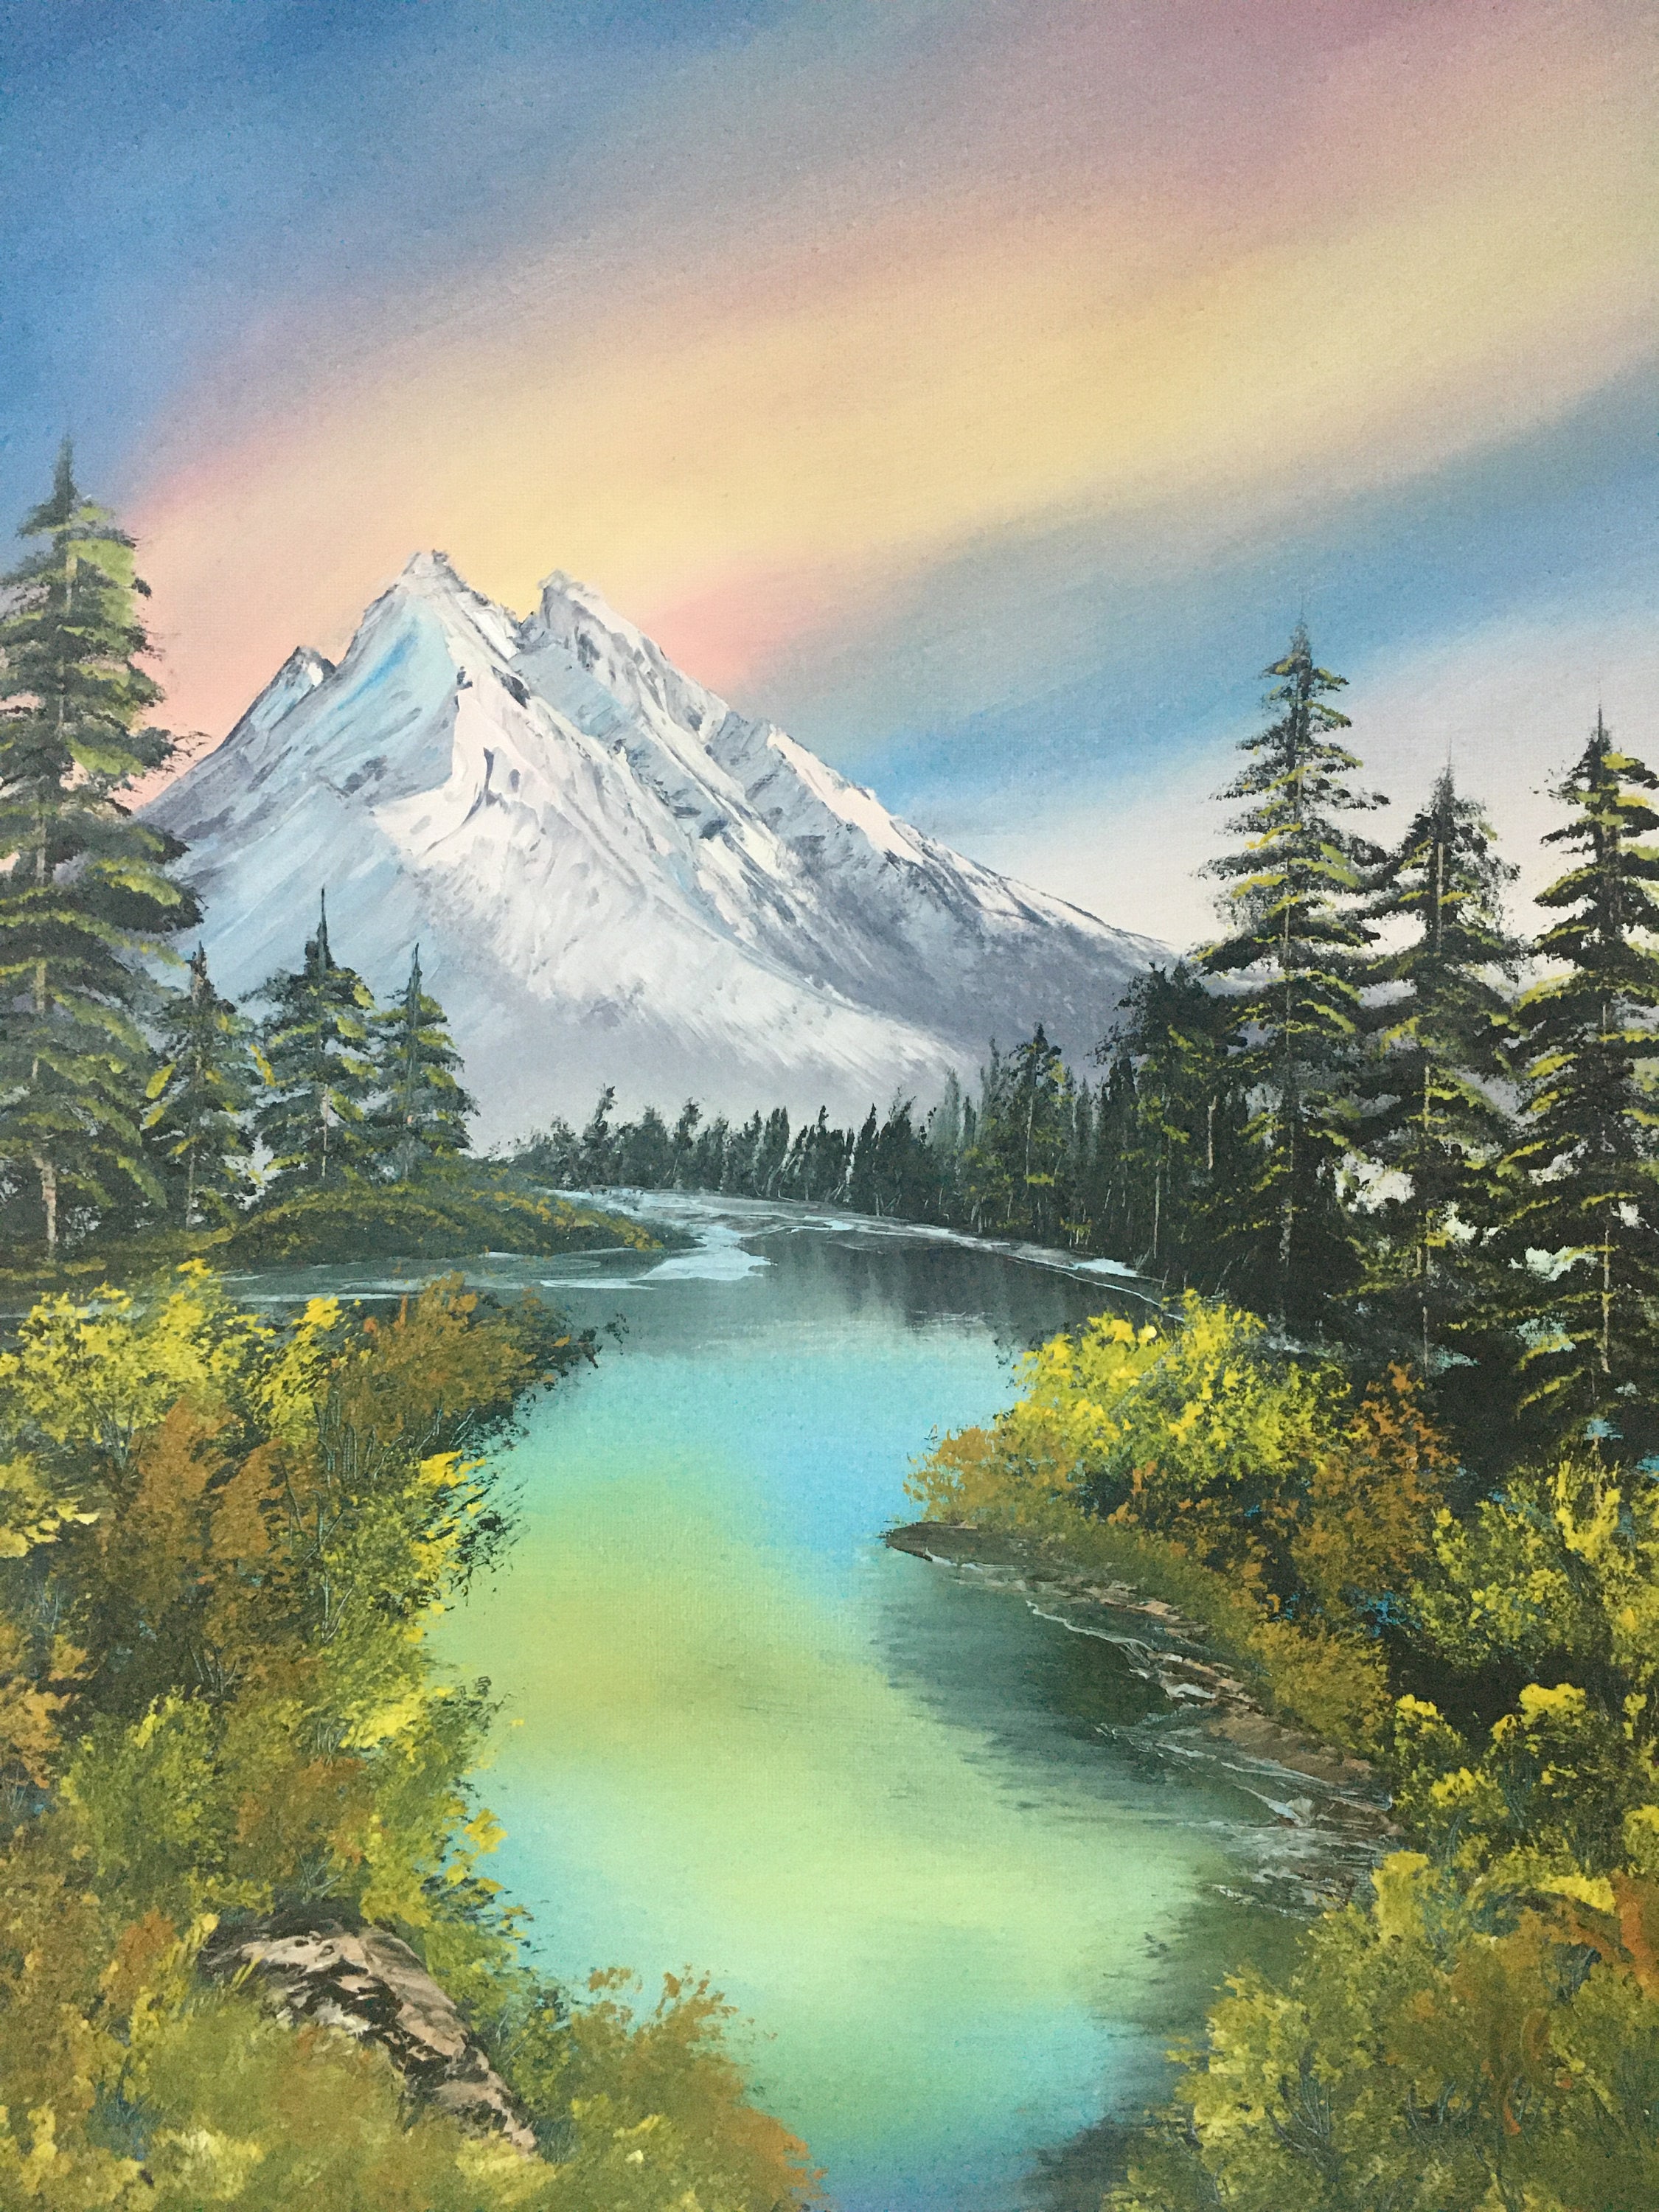 Bob Ross Painting with Ken Wuetcher 6/25 Sunday 1-4pm